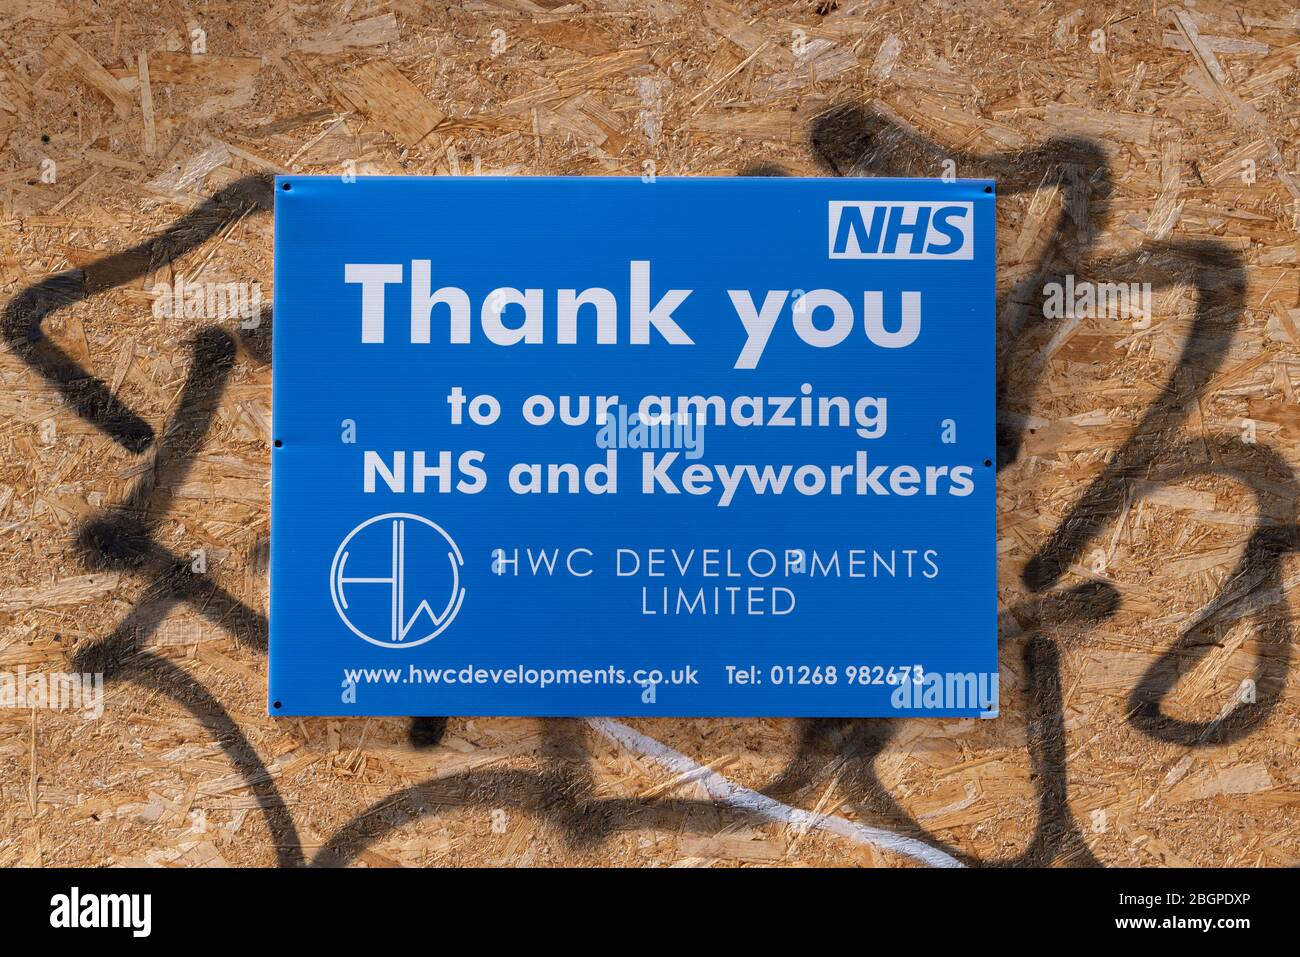 Thank you NHS message on building site during COVID-19 Coronavirus pandemic outbreak lockdown period in Westcliff, Southend on Sea, Essex, UK Stock Photo